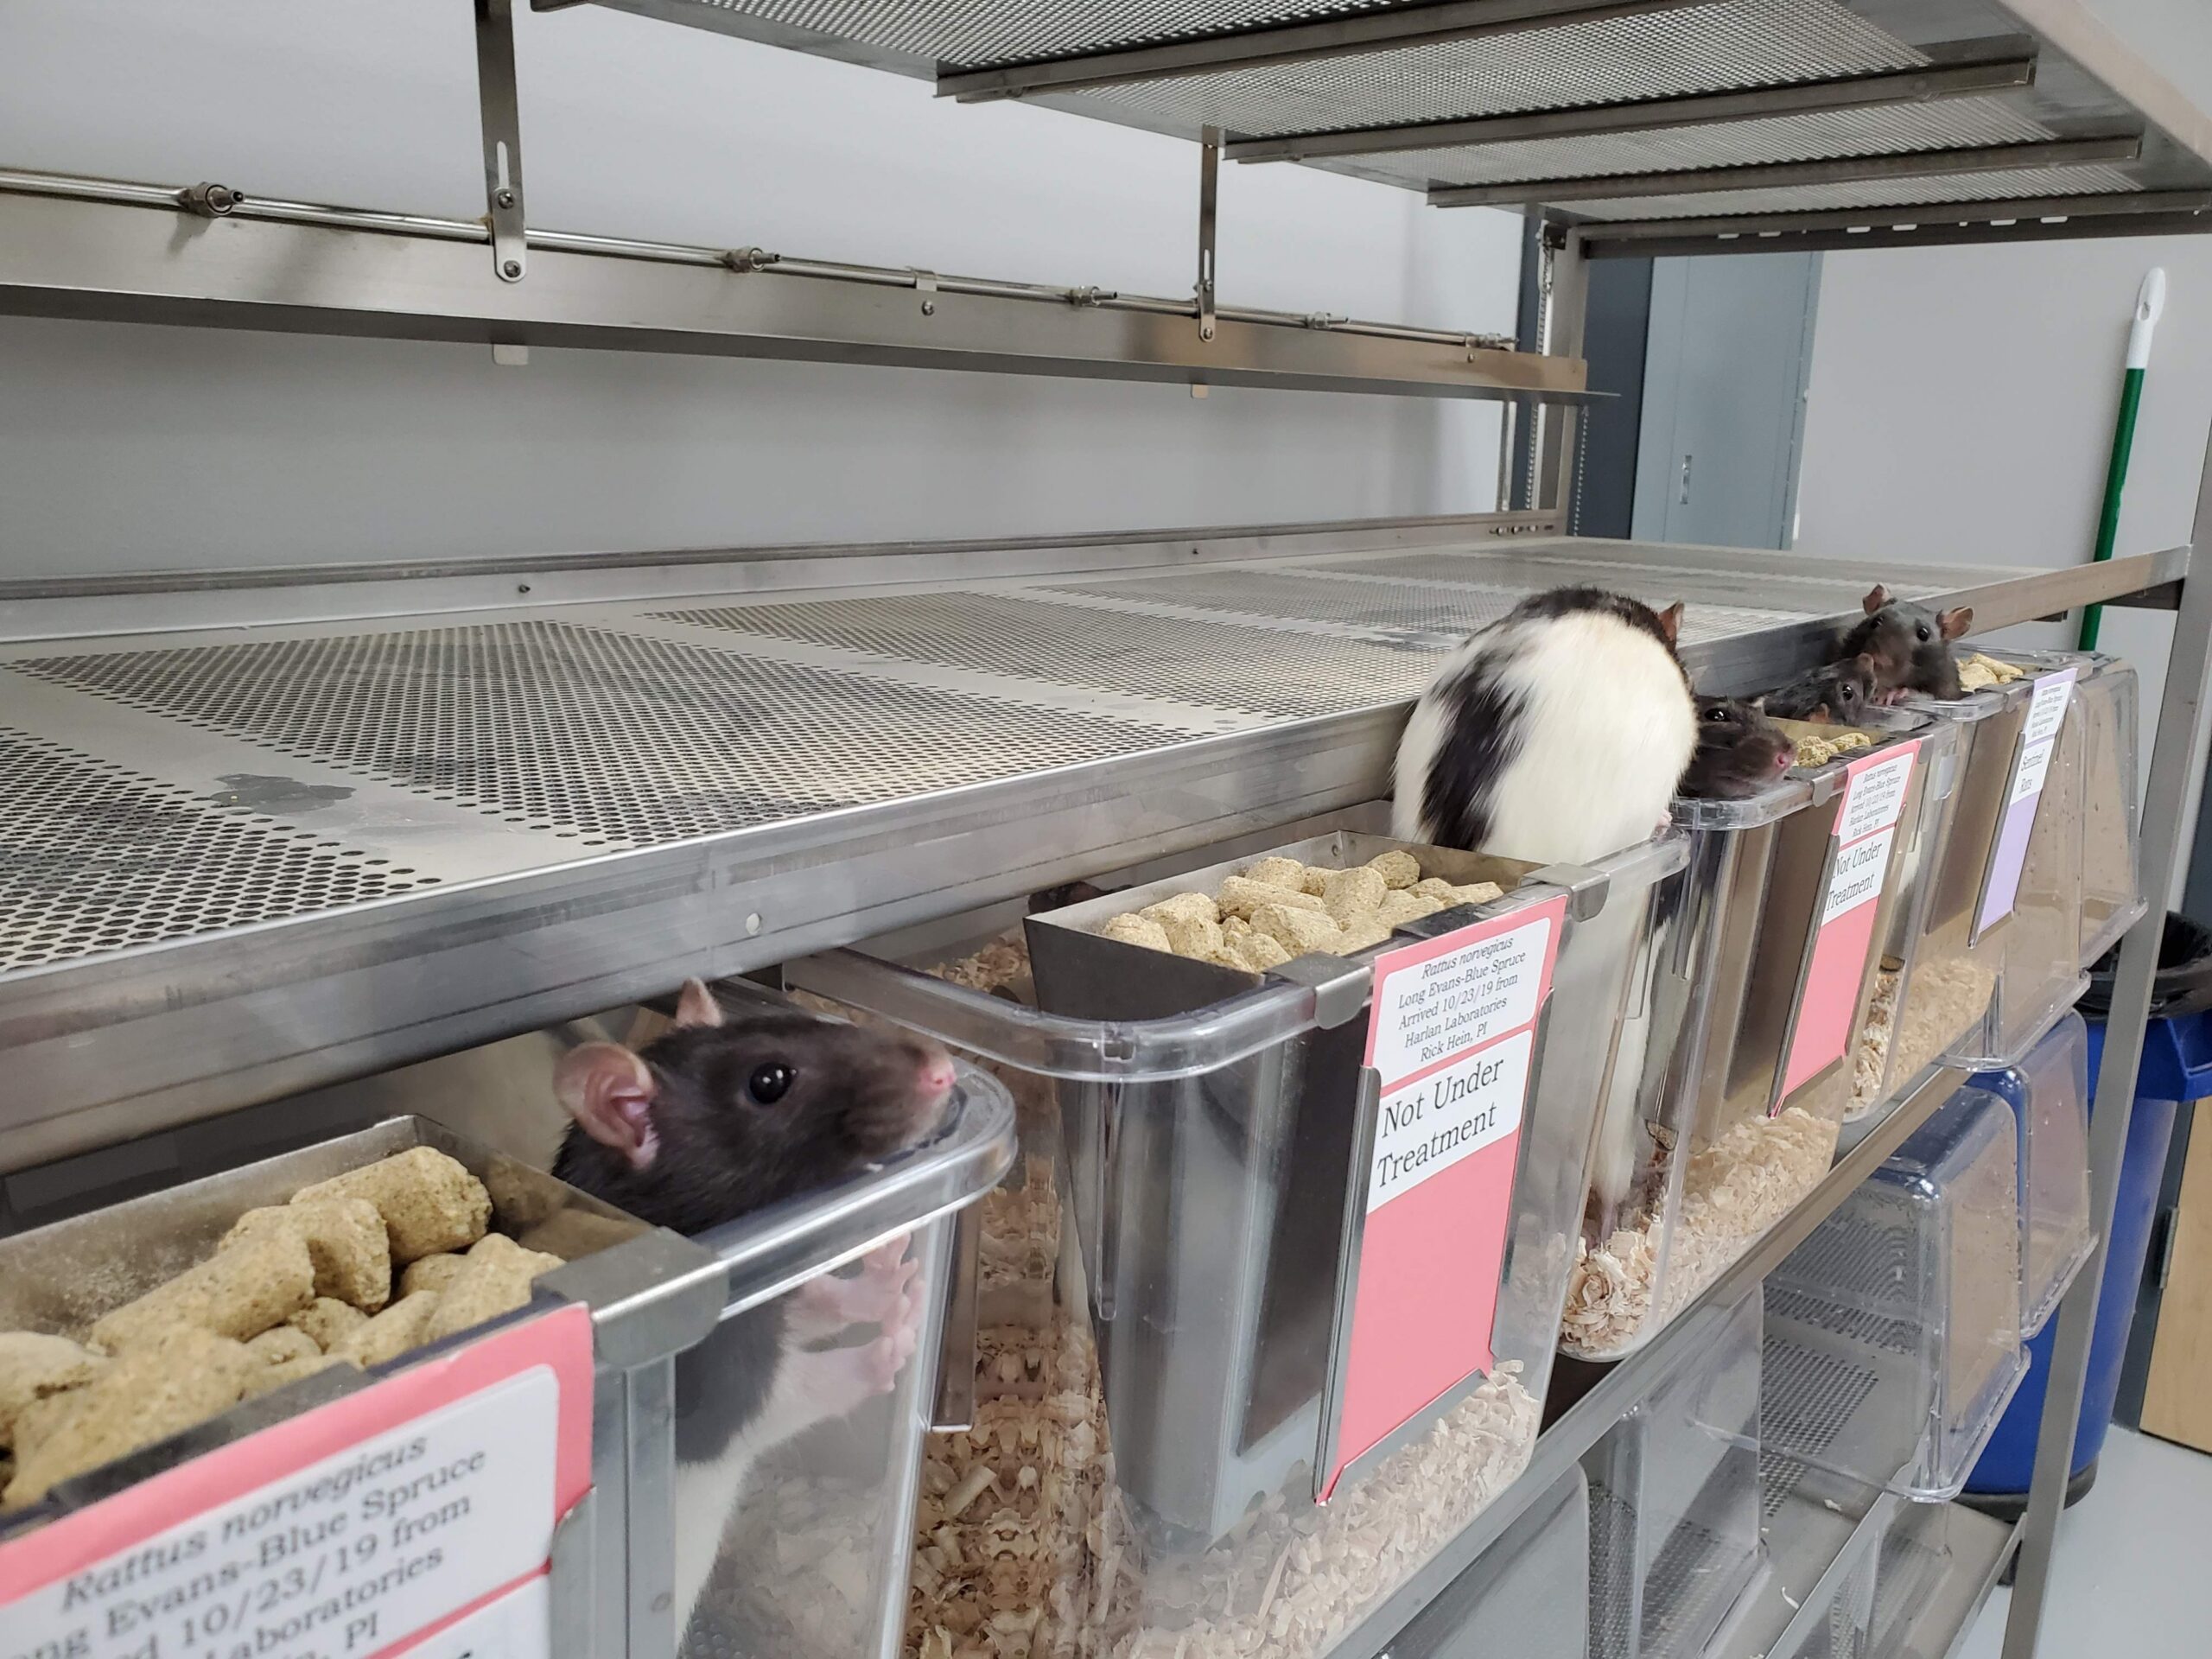 Rats look around from their cages